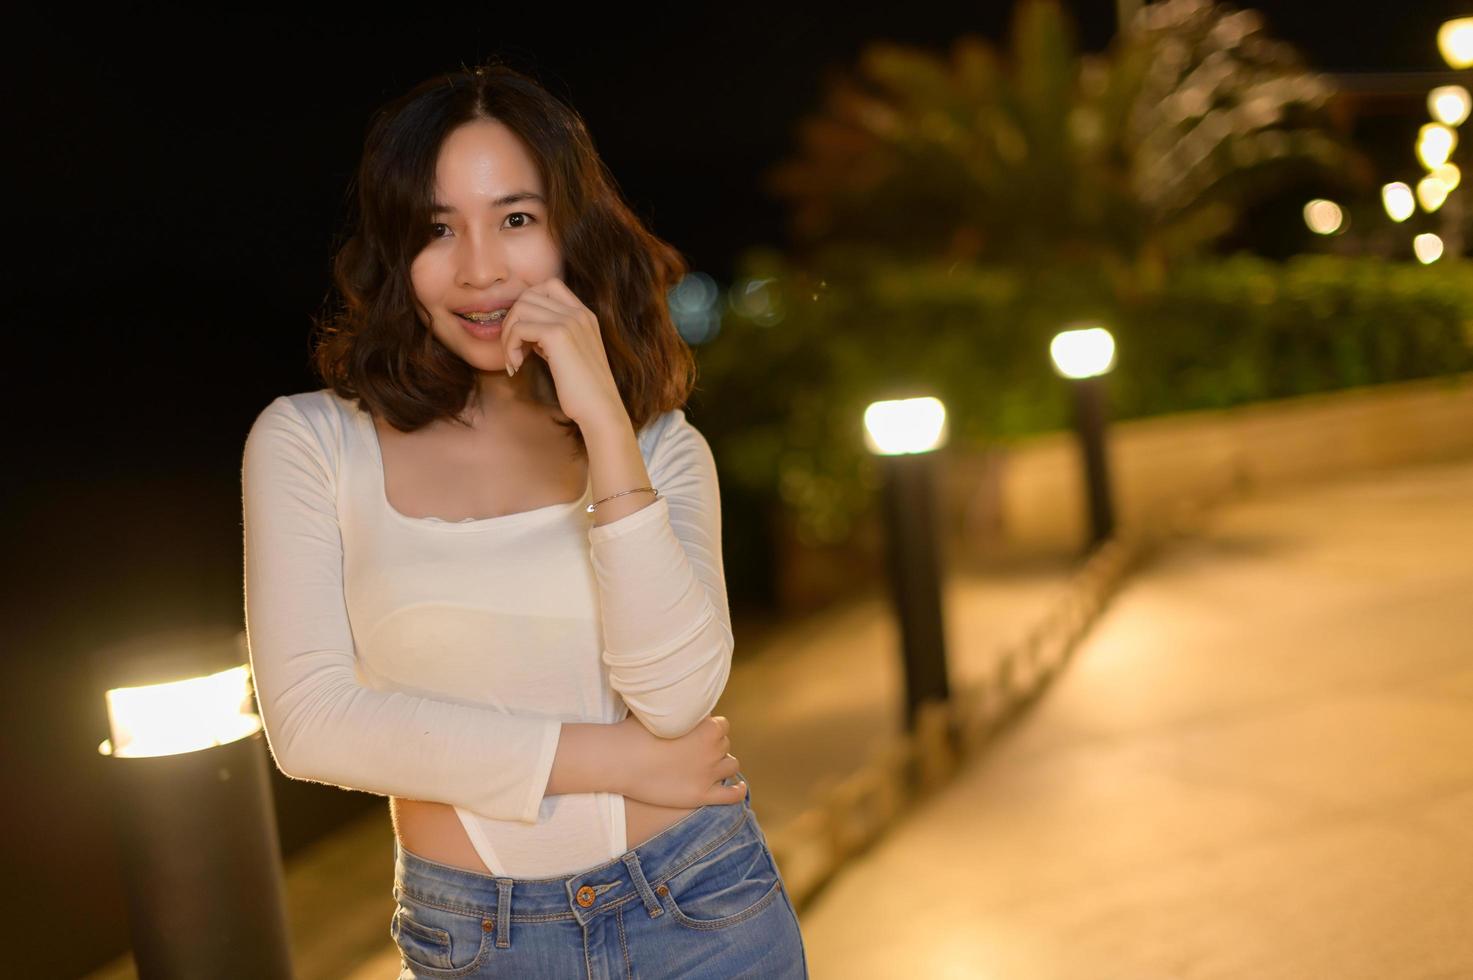 Asian female portrait with lights at night photo